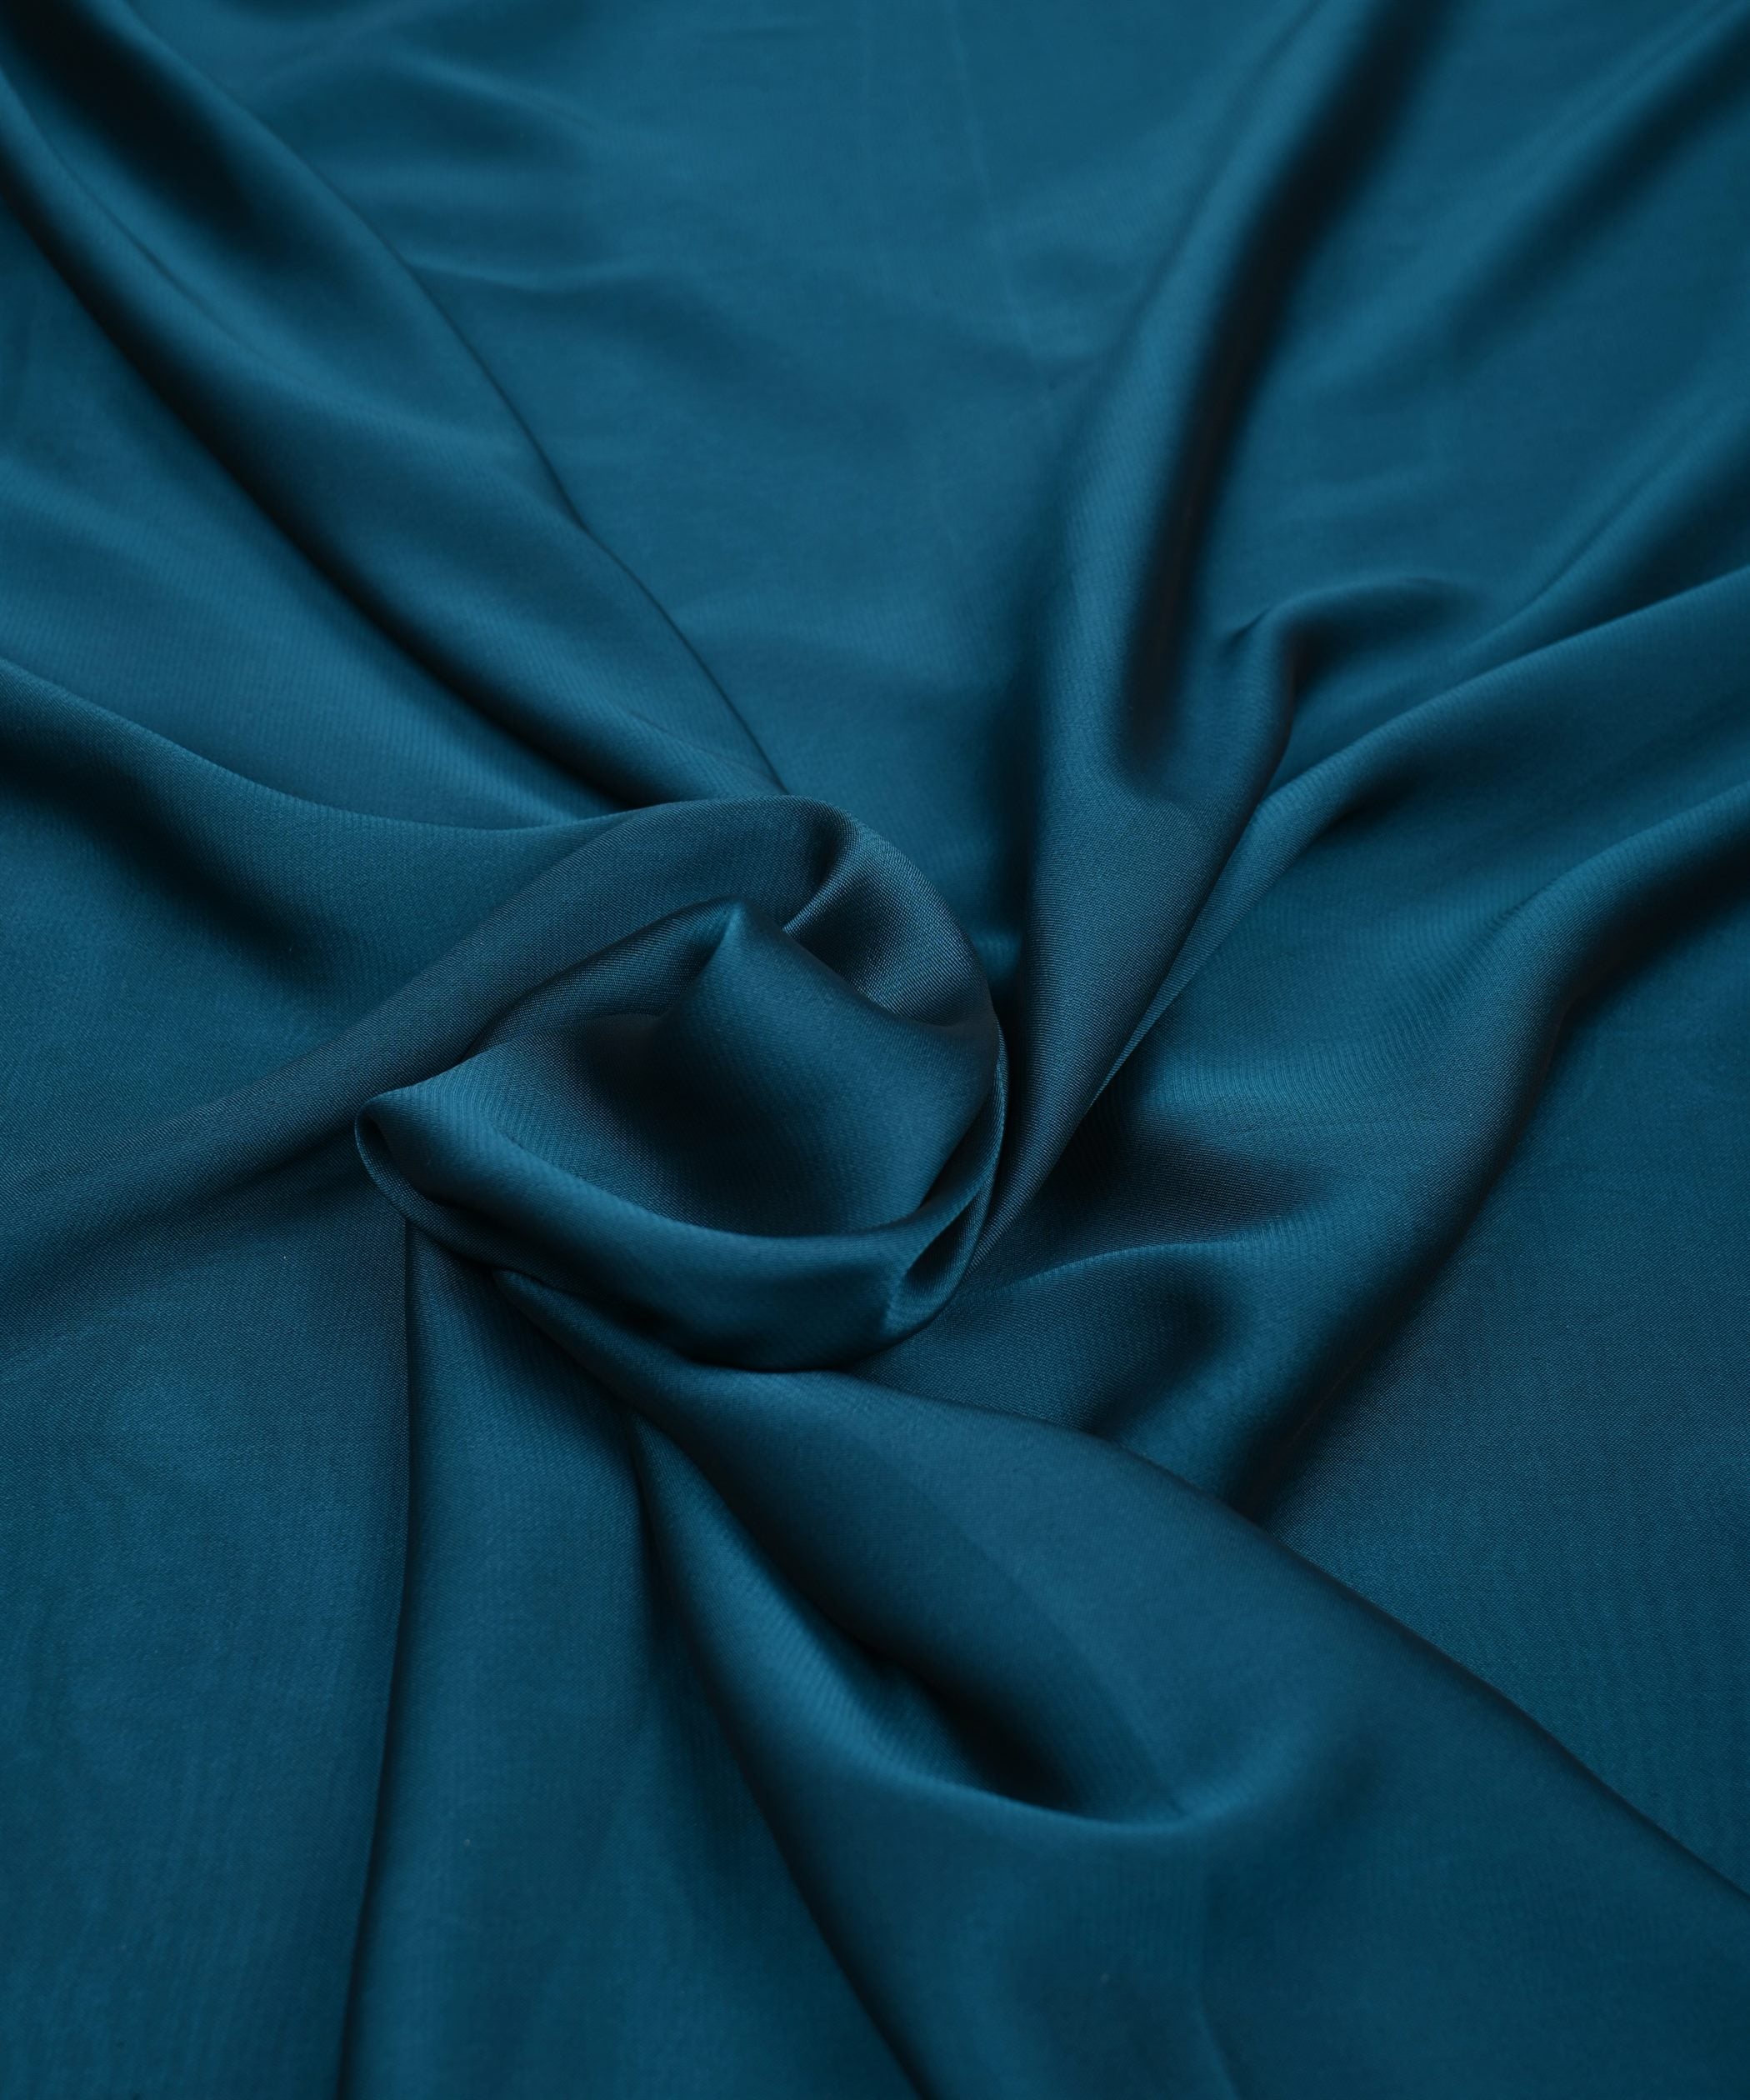 Teal Plain Dyed Georgette Fabric